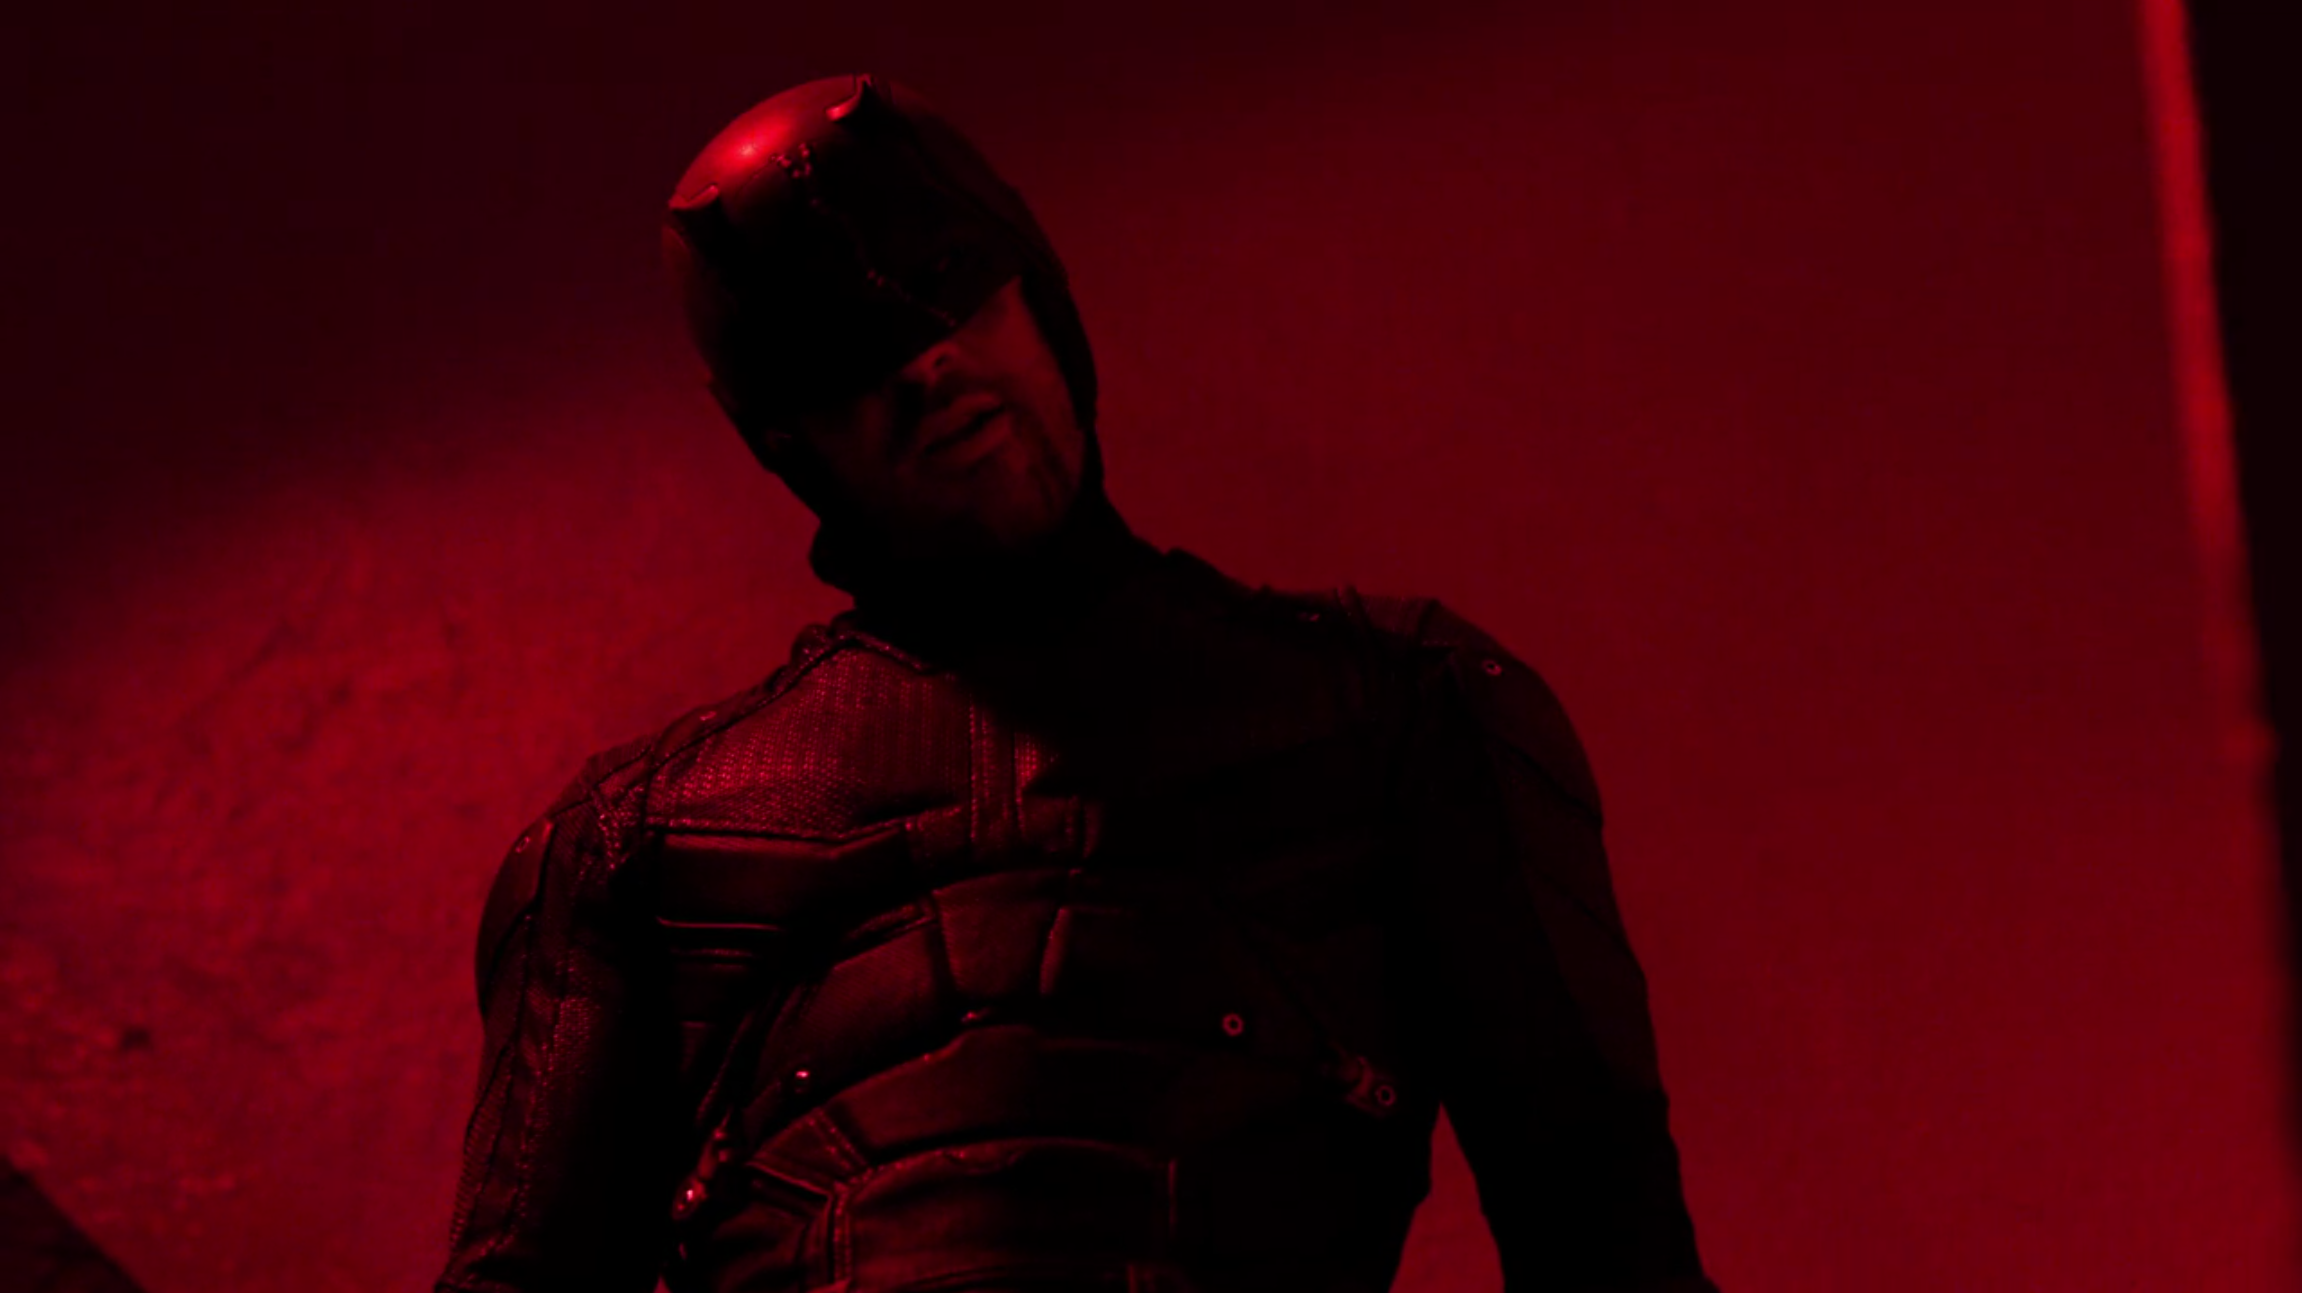 Netflix drops Daredevil, but suggests that the character could return.